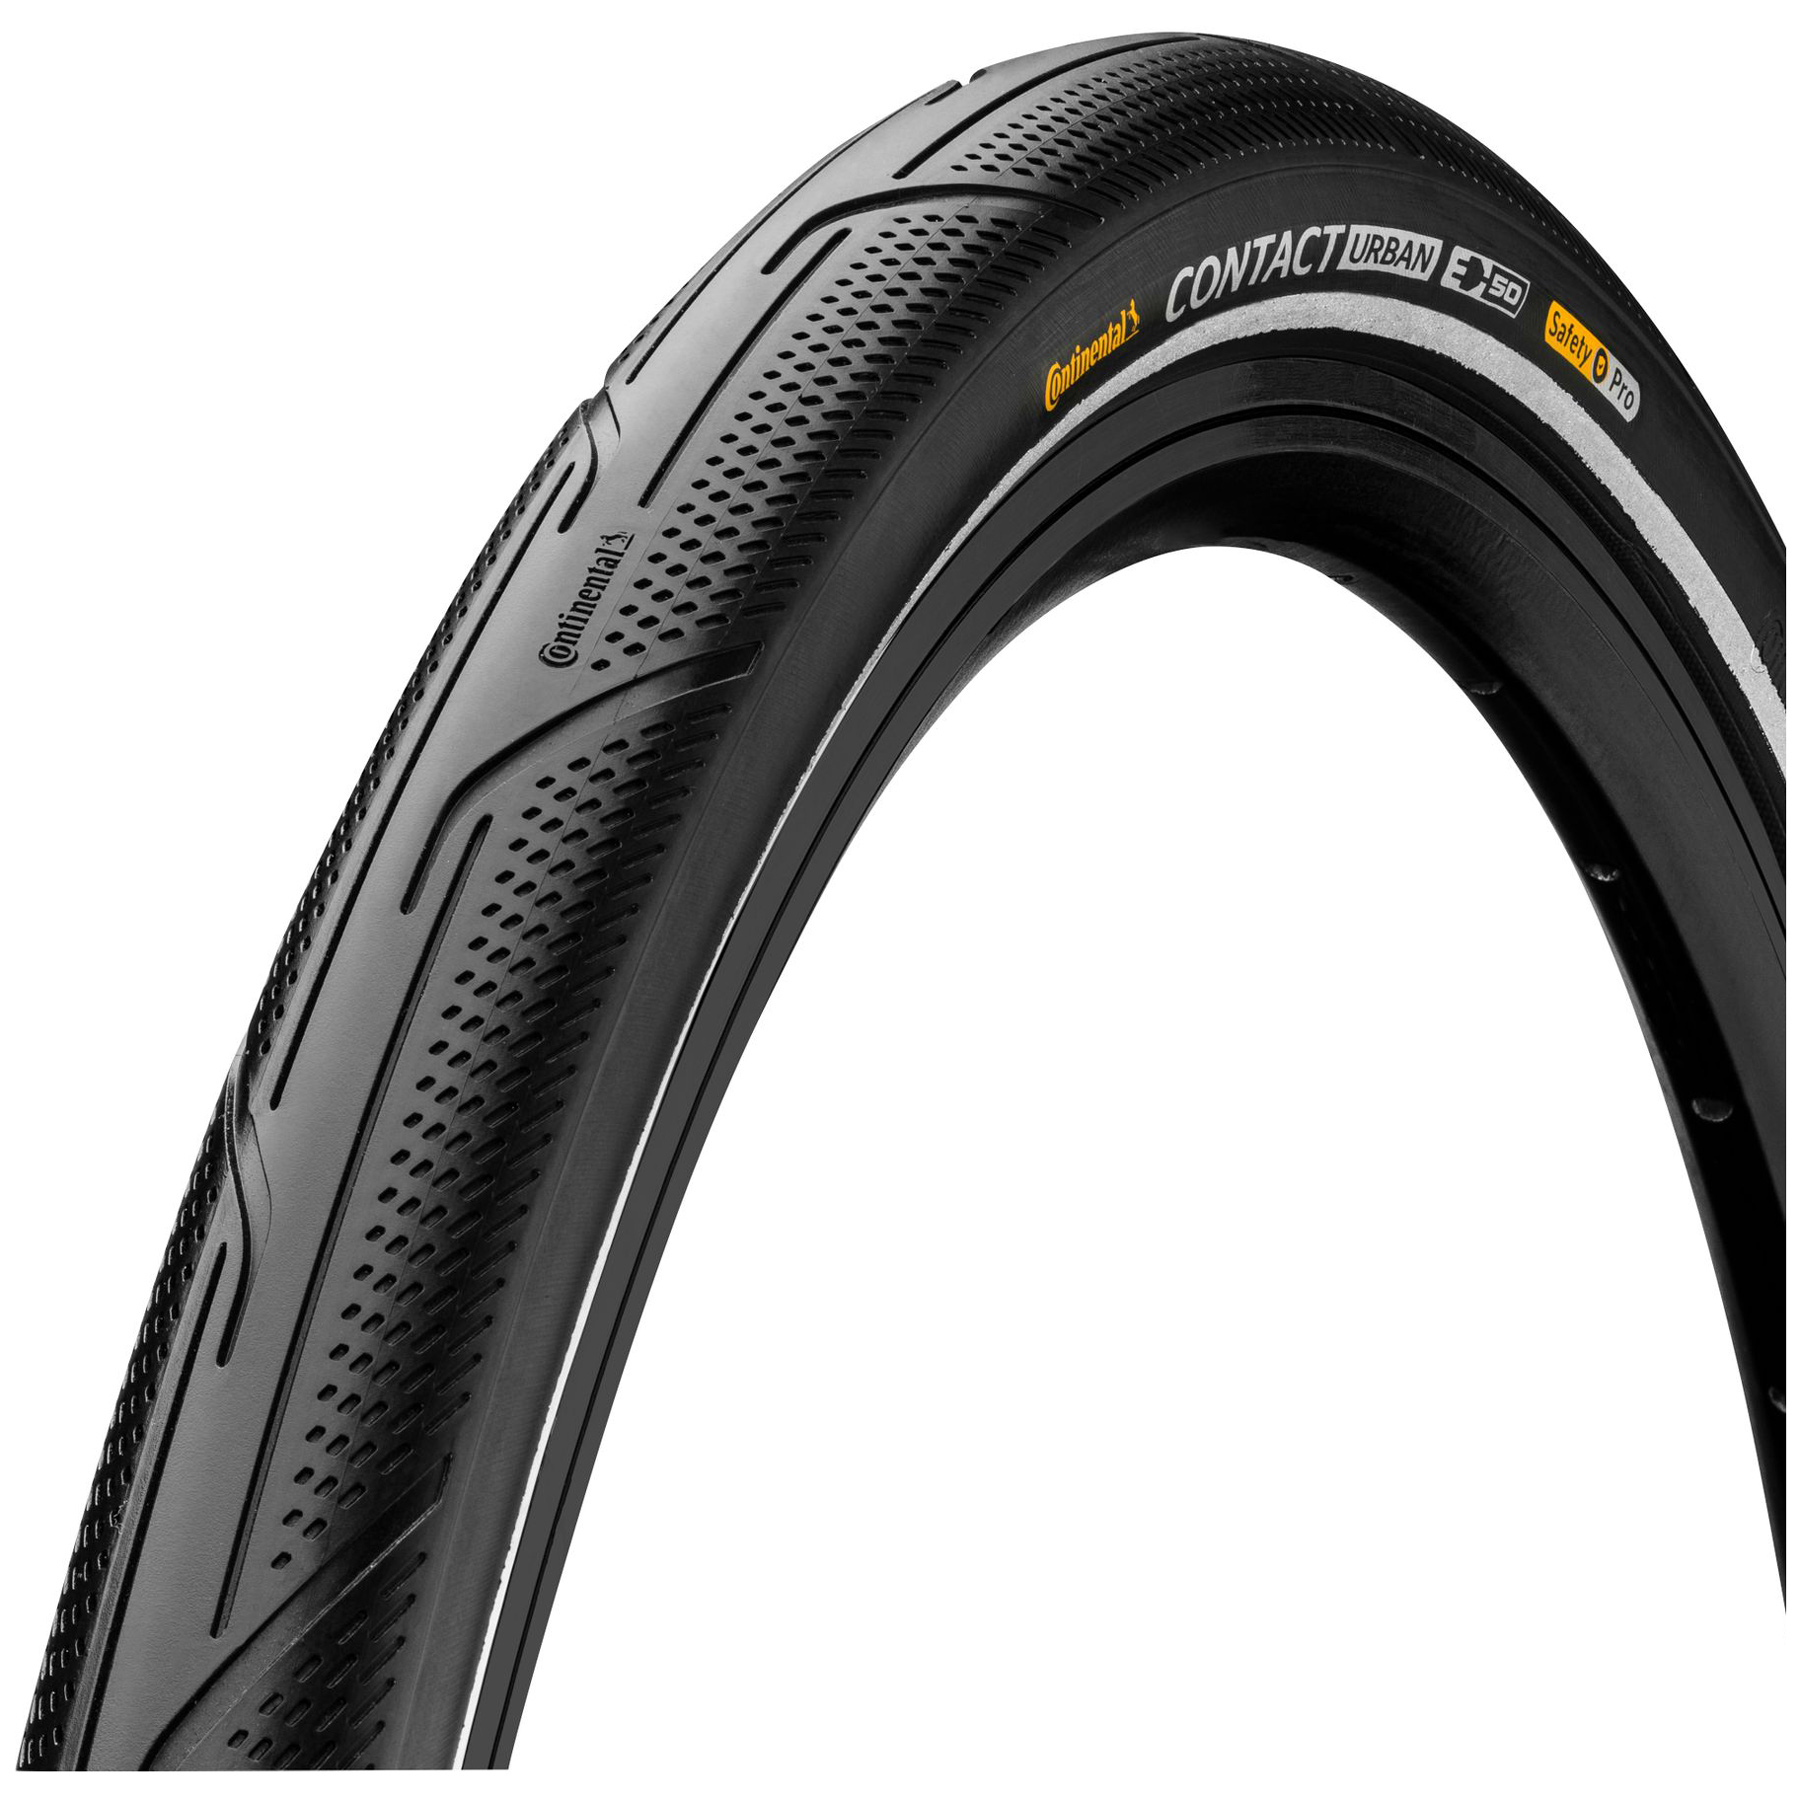 Picture of Continental Contact Urban Wire Bead Tire - PureGrip | black reflective - ECE-R75 - 42-622